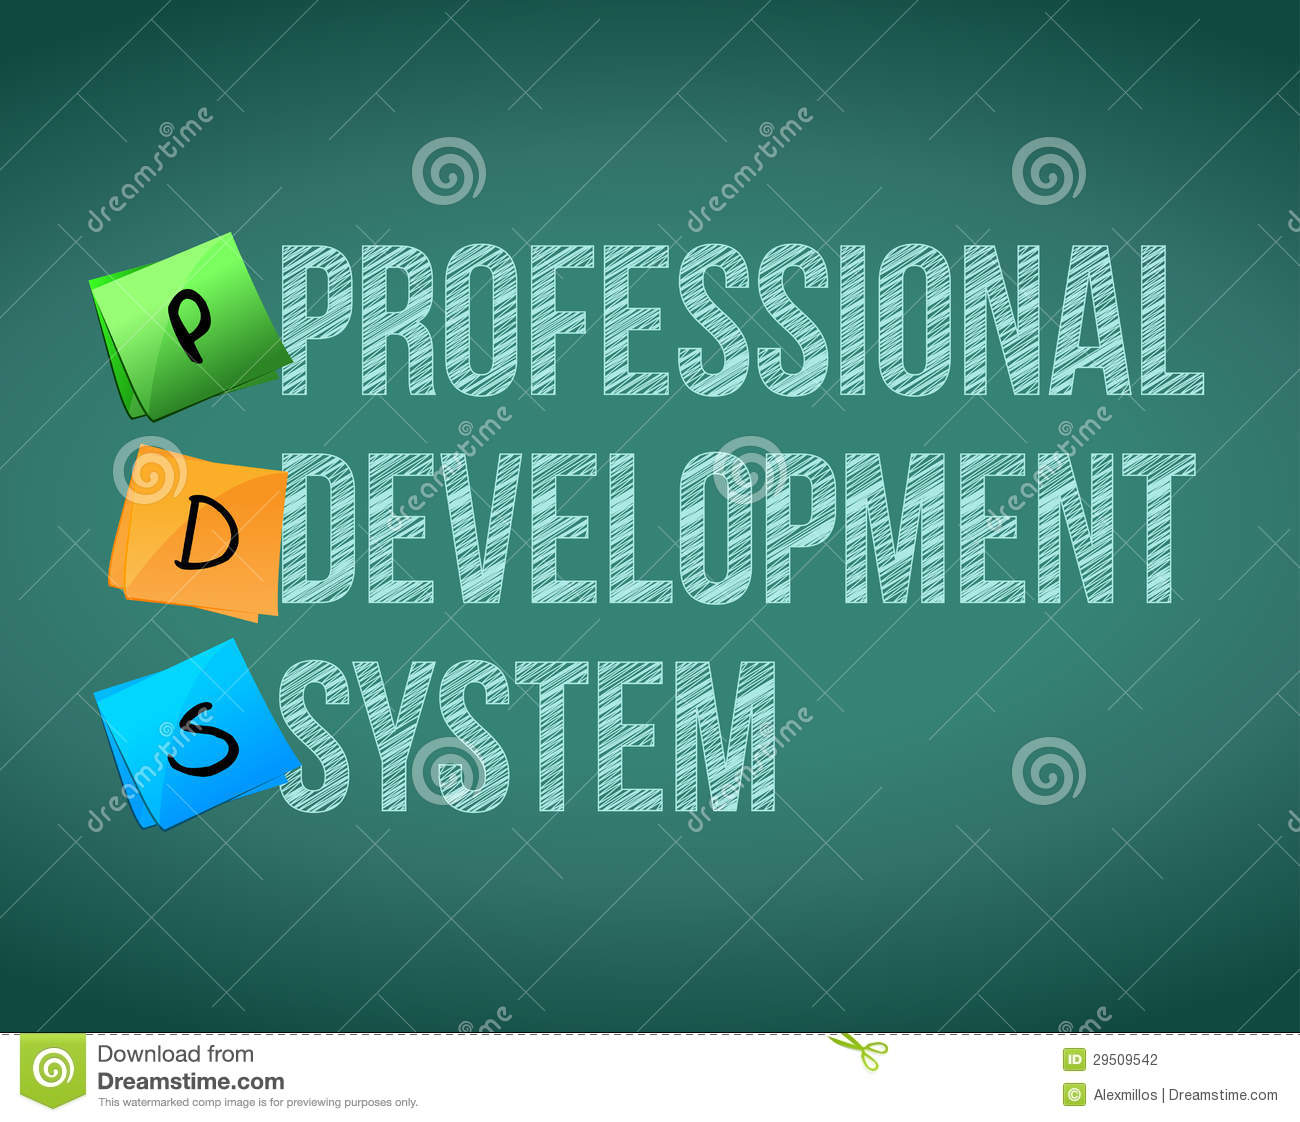 Professional Development System And Posts Stock Photography   Image    